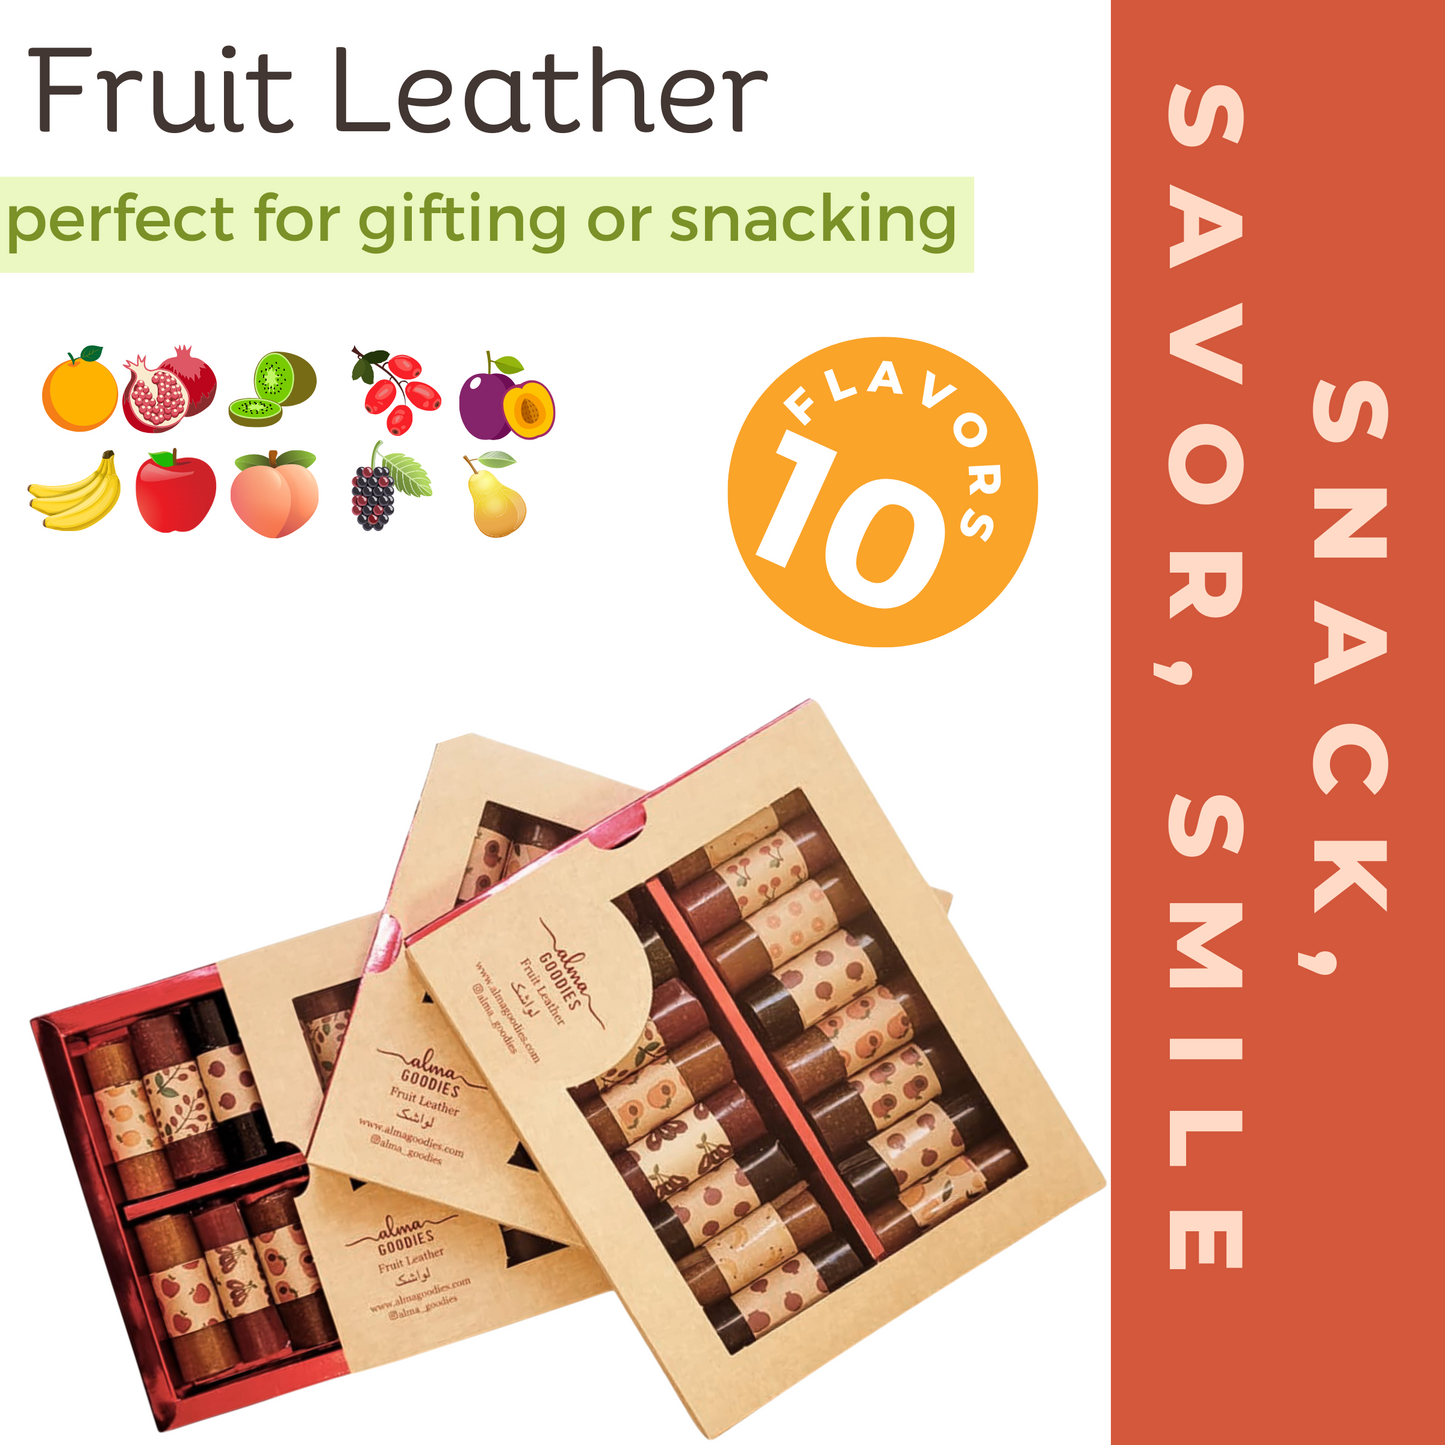 16-Pack Mixed Fruit Leather Rolls - Assorted Natural Snack Variety, 10 Flavors